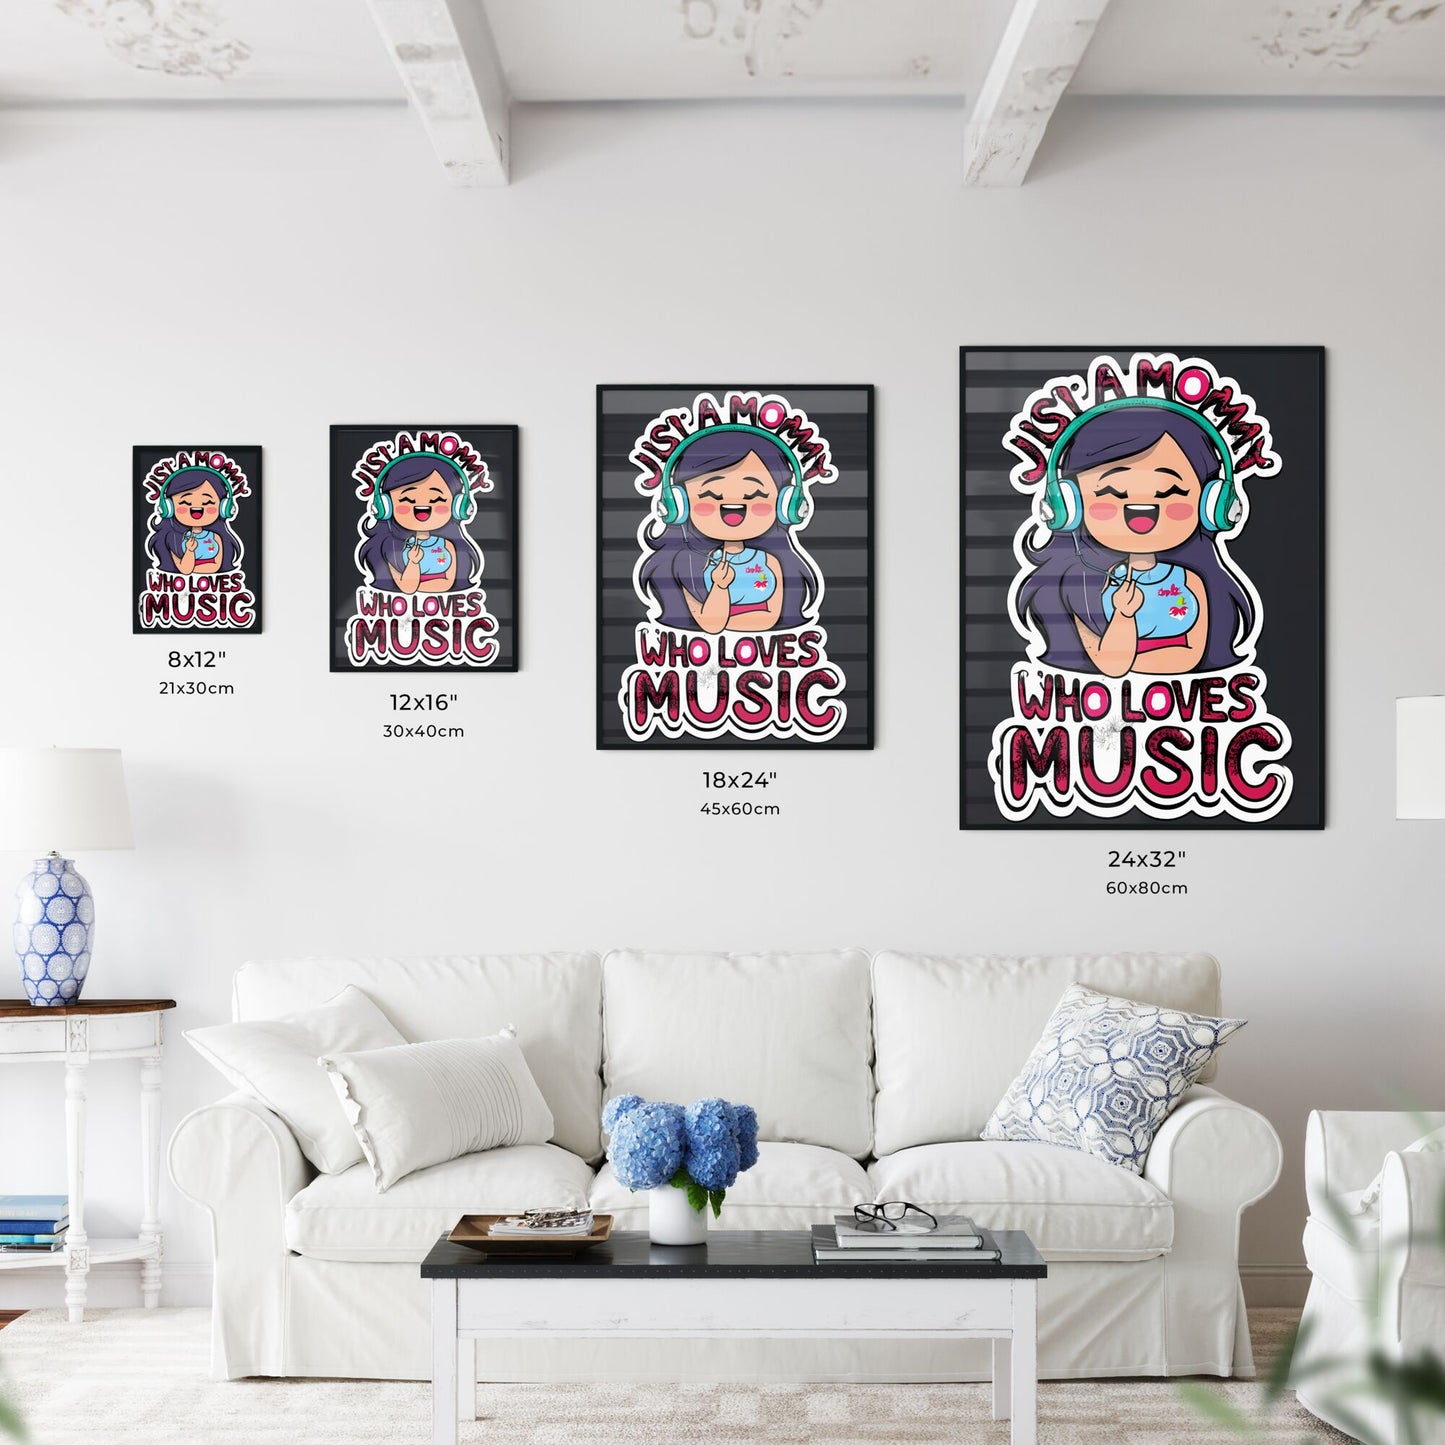 Just A Mom Who Loves Music - A Sticker Of A Girl Wearing Headphones Art Print Default Title